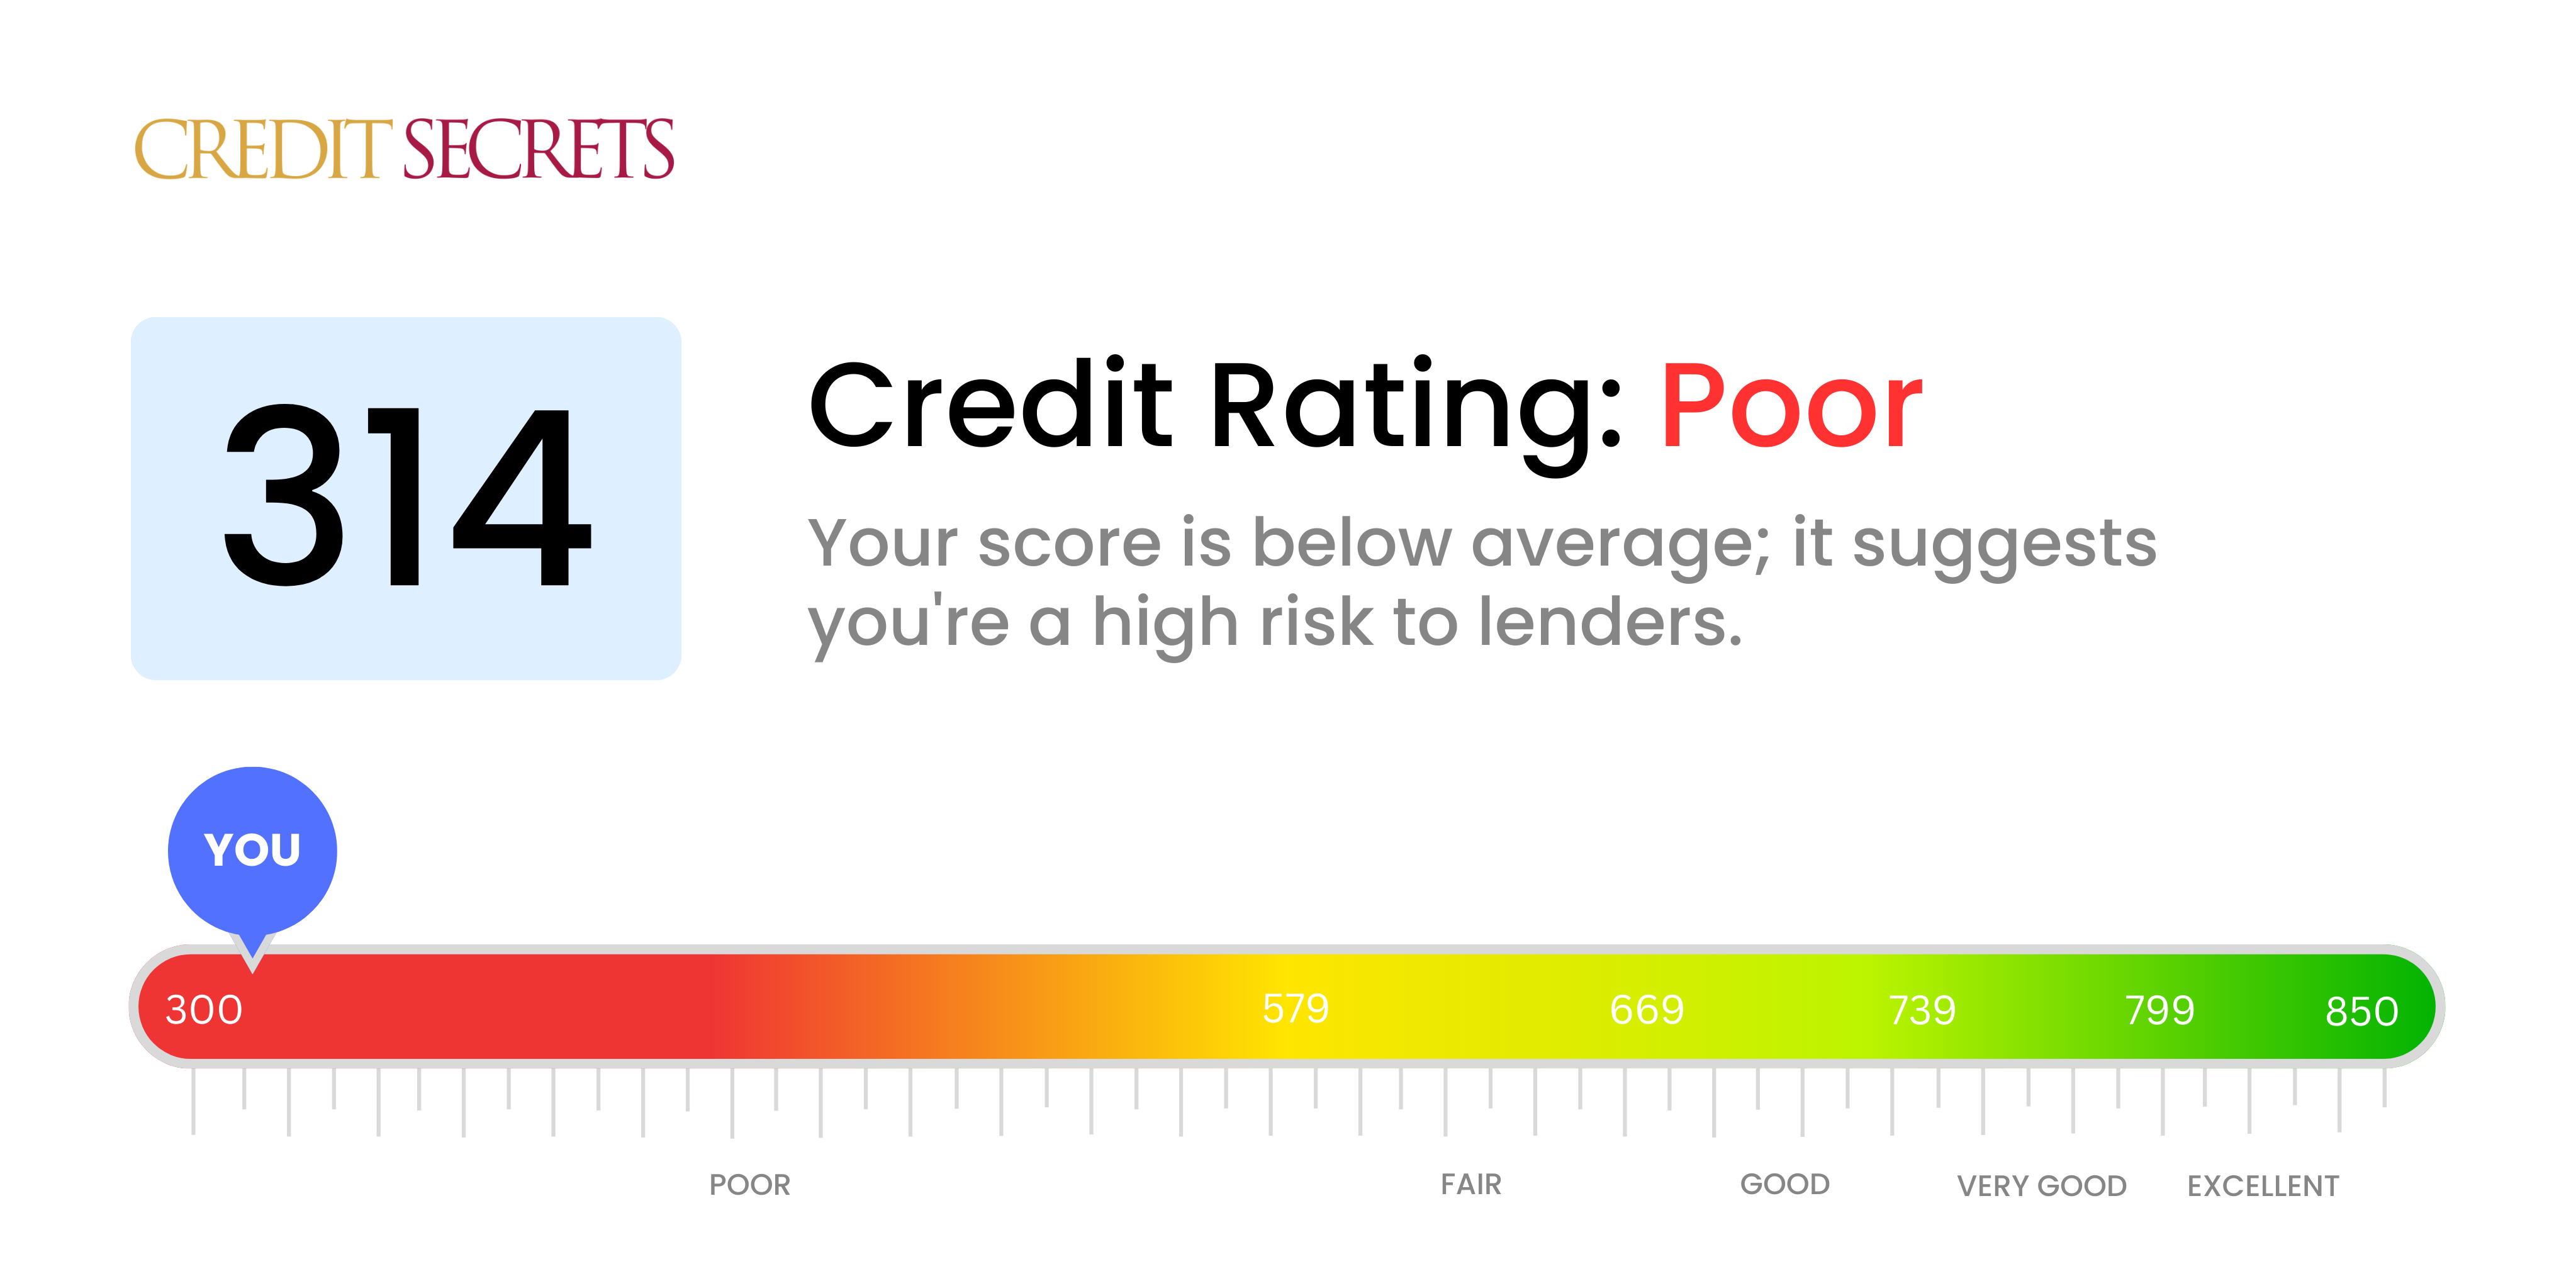 Is 314 a good credit score?